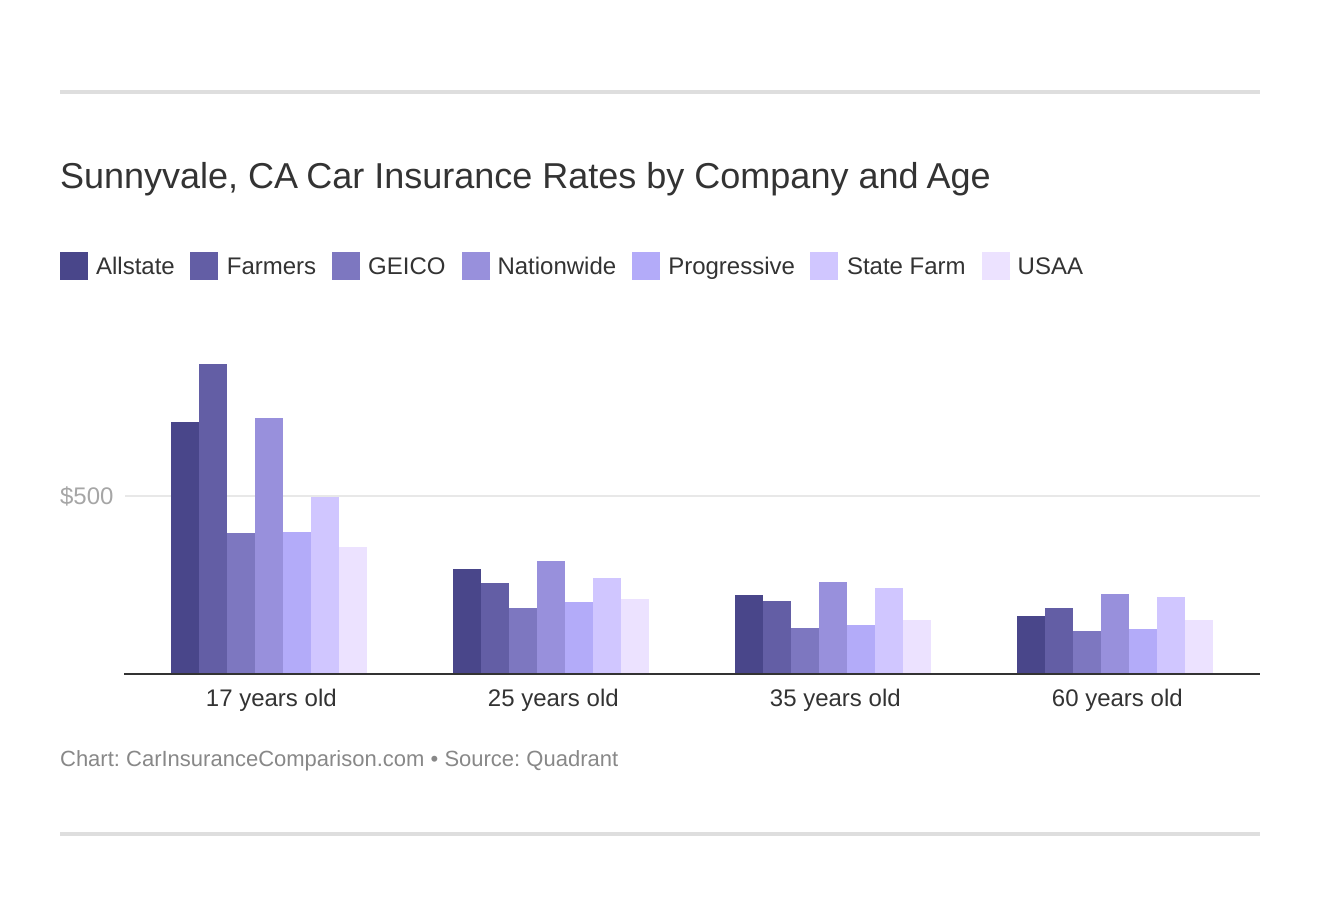 Sunnyvale, CA Car Insurance Rates by Company and Age